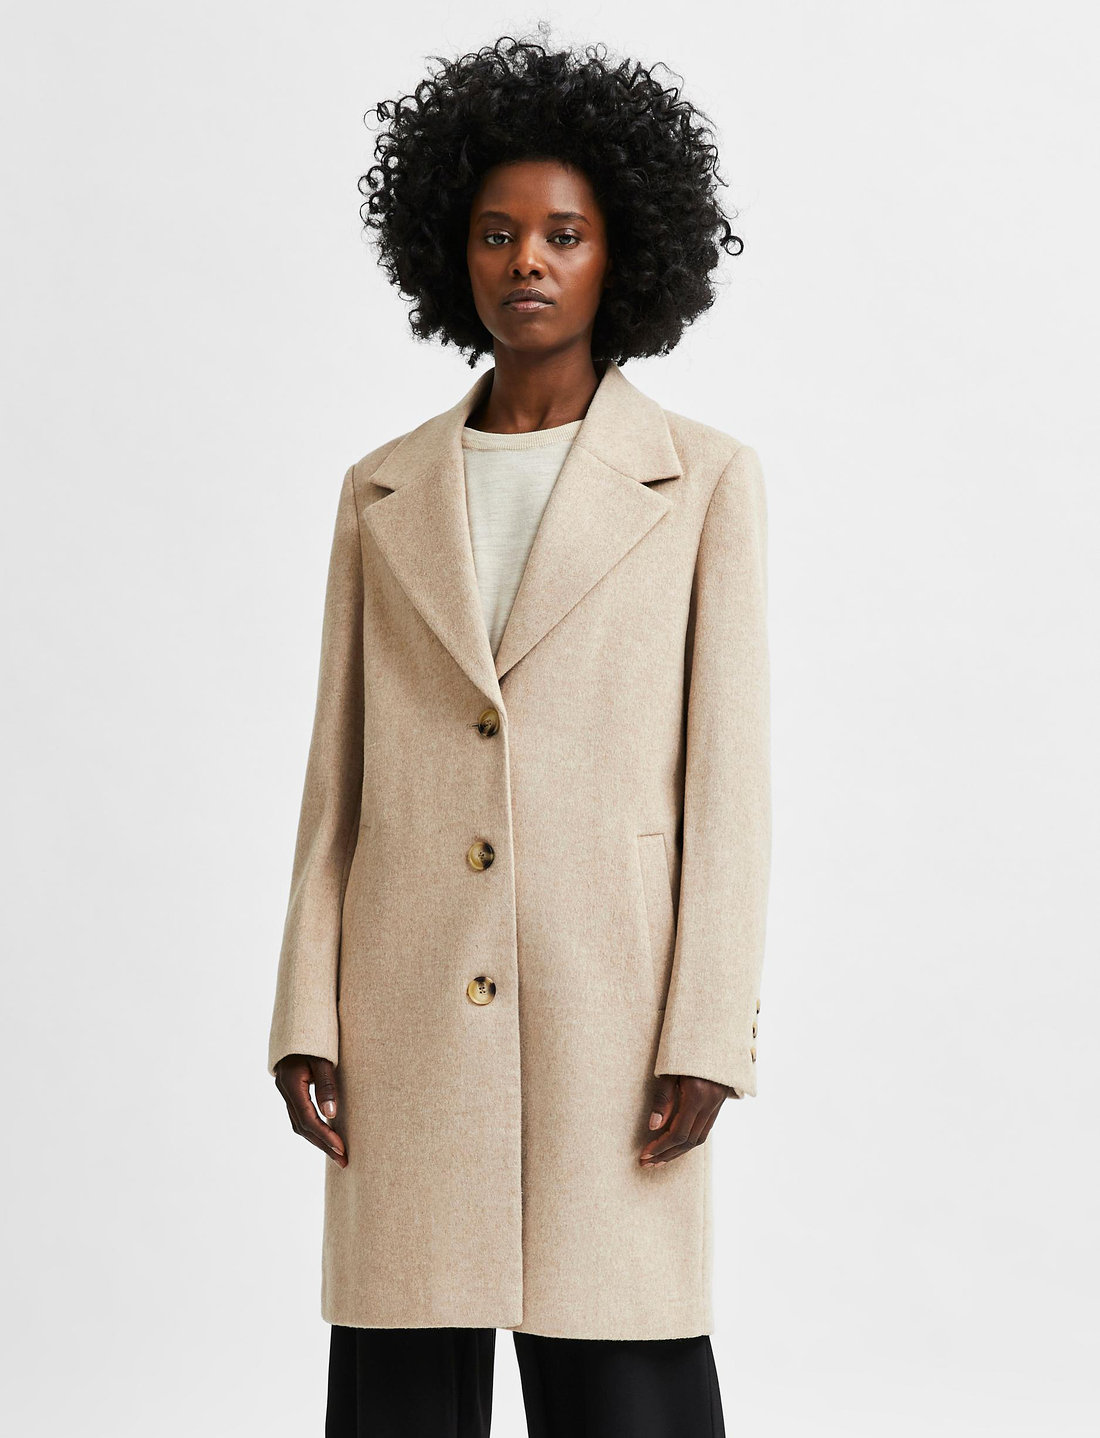 Selected Femme Slfnew Sasja Wool Coat B Noos - 85.00 €. Buy Winter Coats  from Selected Femme online at . Fast delivery and easy returns